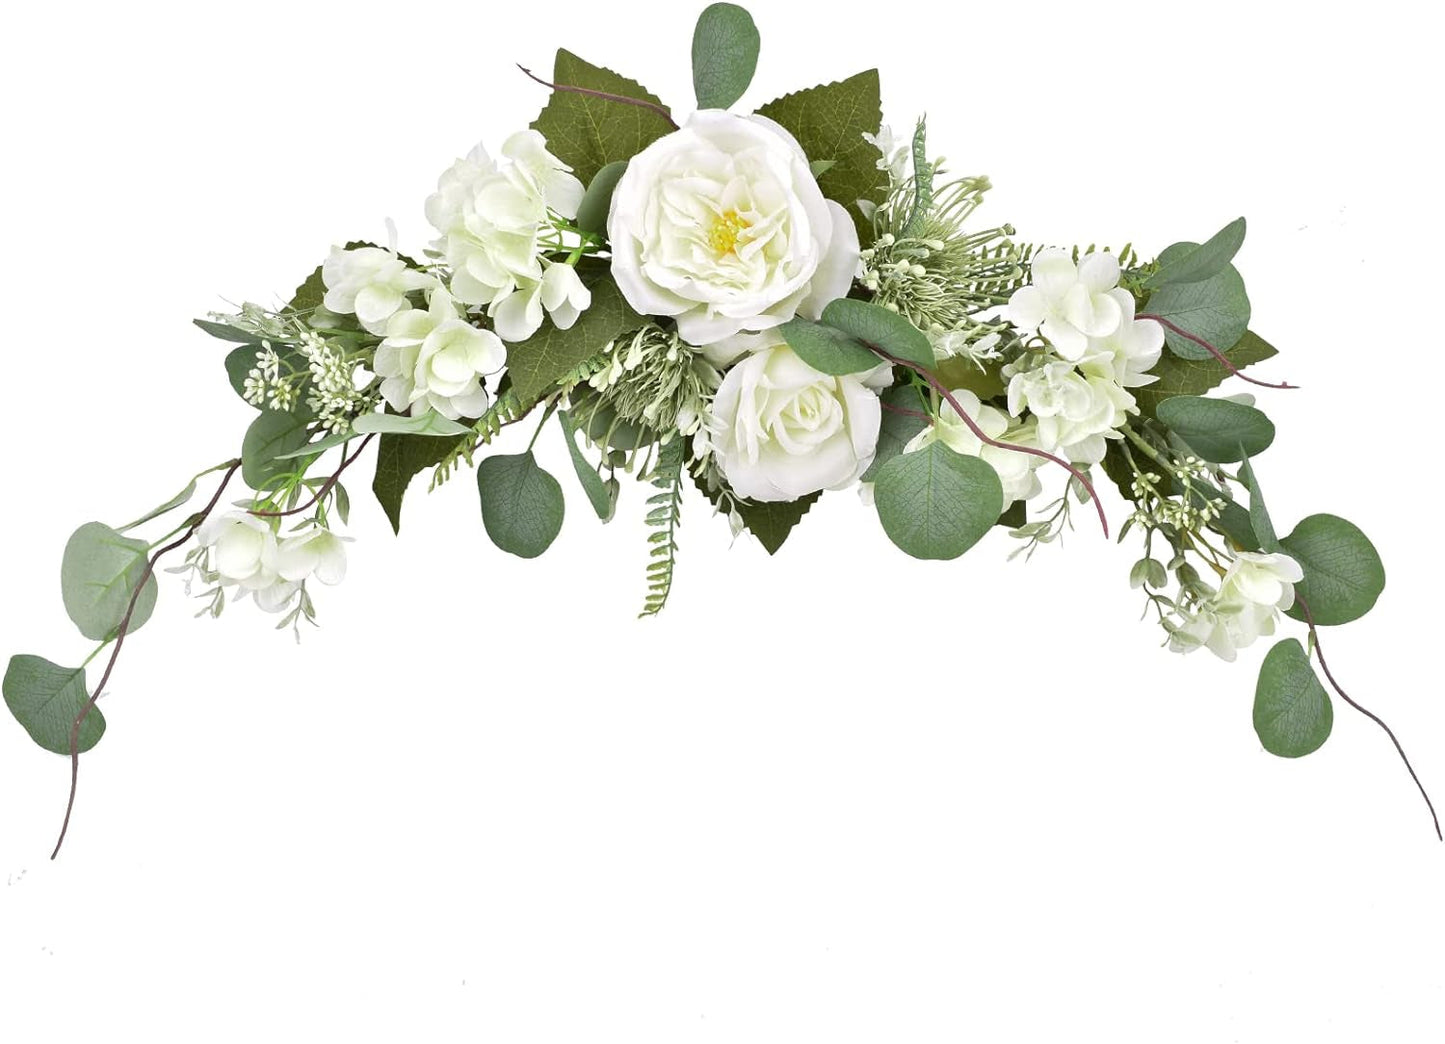 Hydrangea Swag Artificial Flower 28 Inch, White Decorative Swags with Eucalyptus Leaves for Home Room Door Wall Wedding Arch Garden Party Tabletop Decoration